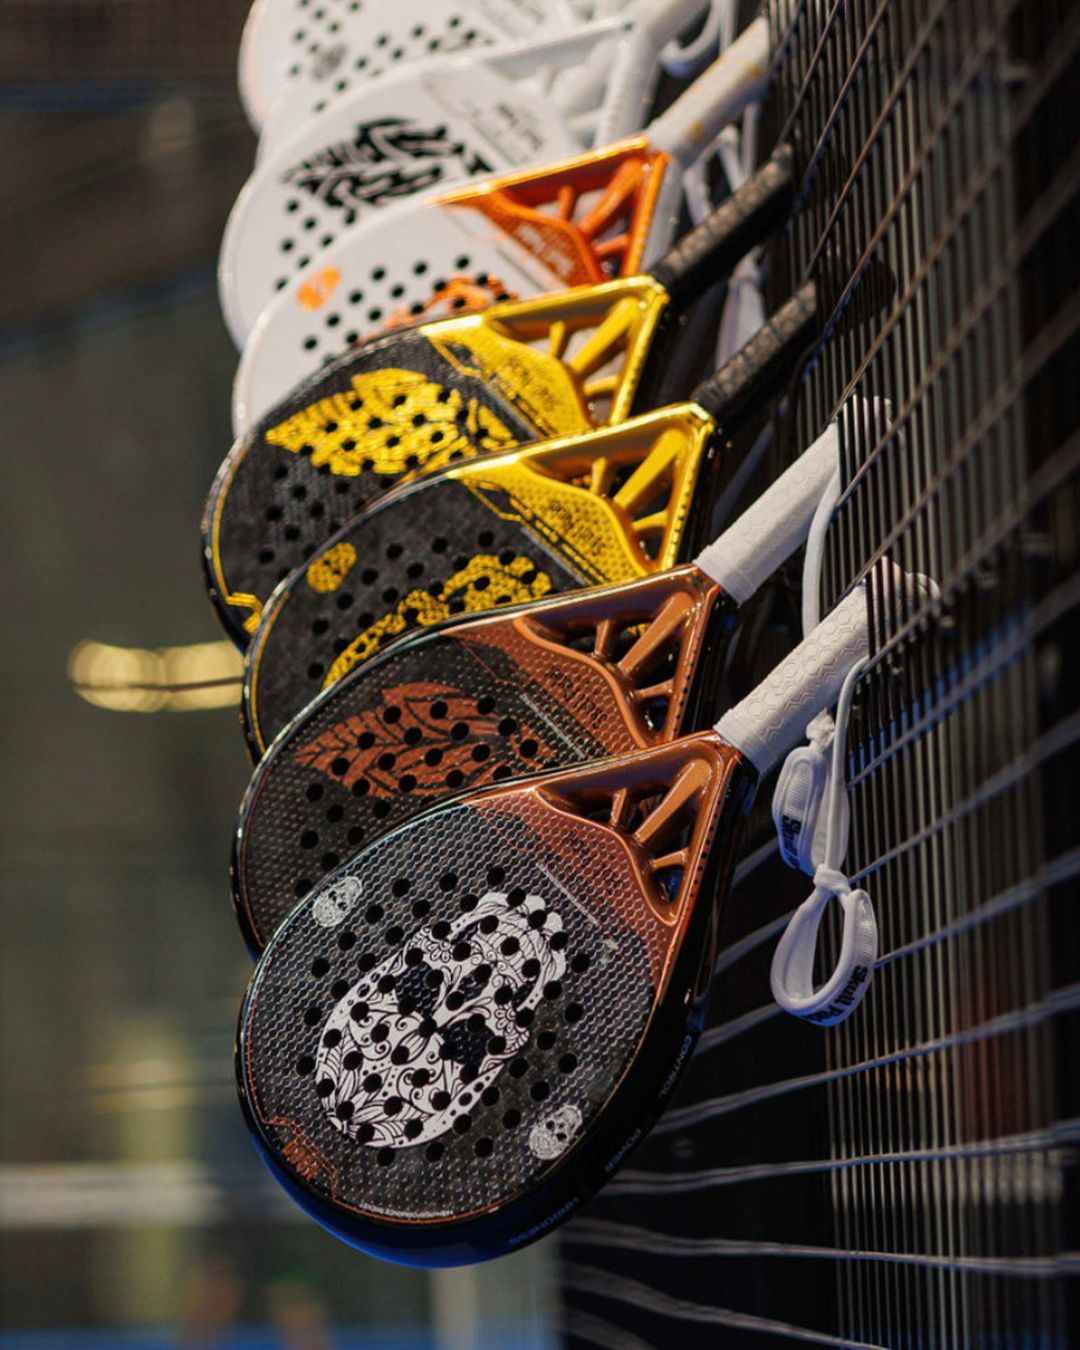 Each racket is meticulously designed and constructed to meet the demands of both amateur enthusiasts and professional players alike.